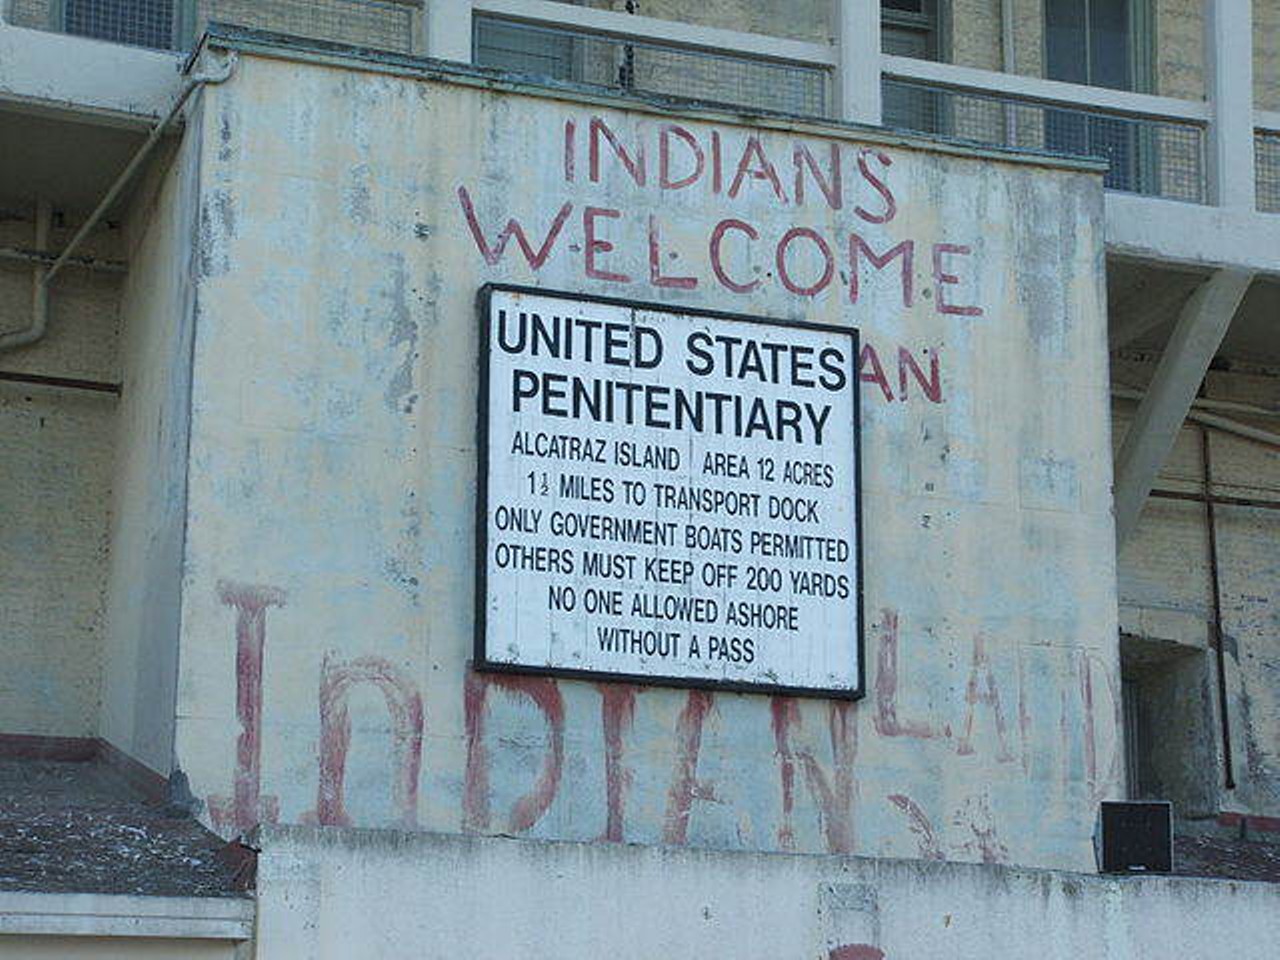 10. Un-Thanksgiving Day, or the Indigenous Peoples Sunrise Ceremony, is celebrated by Native Americans every year at Alcatraz.